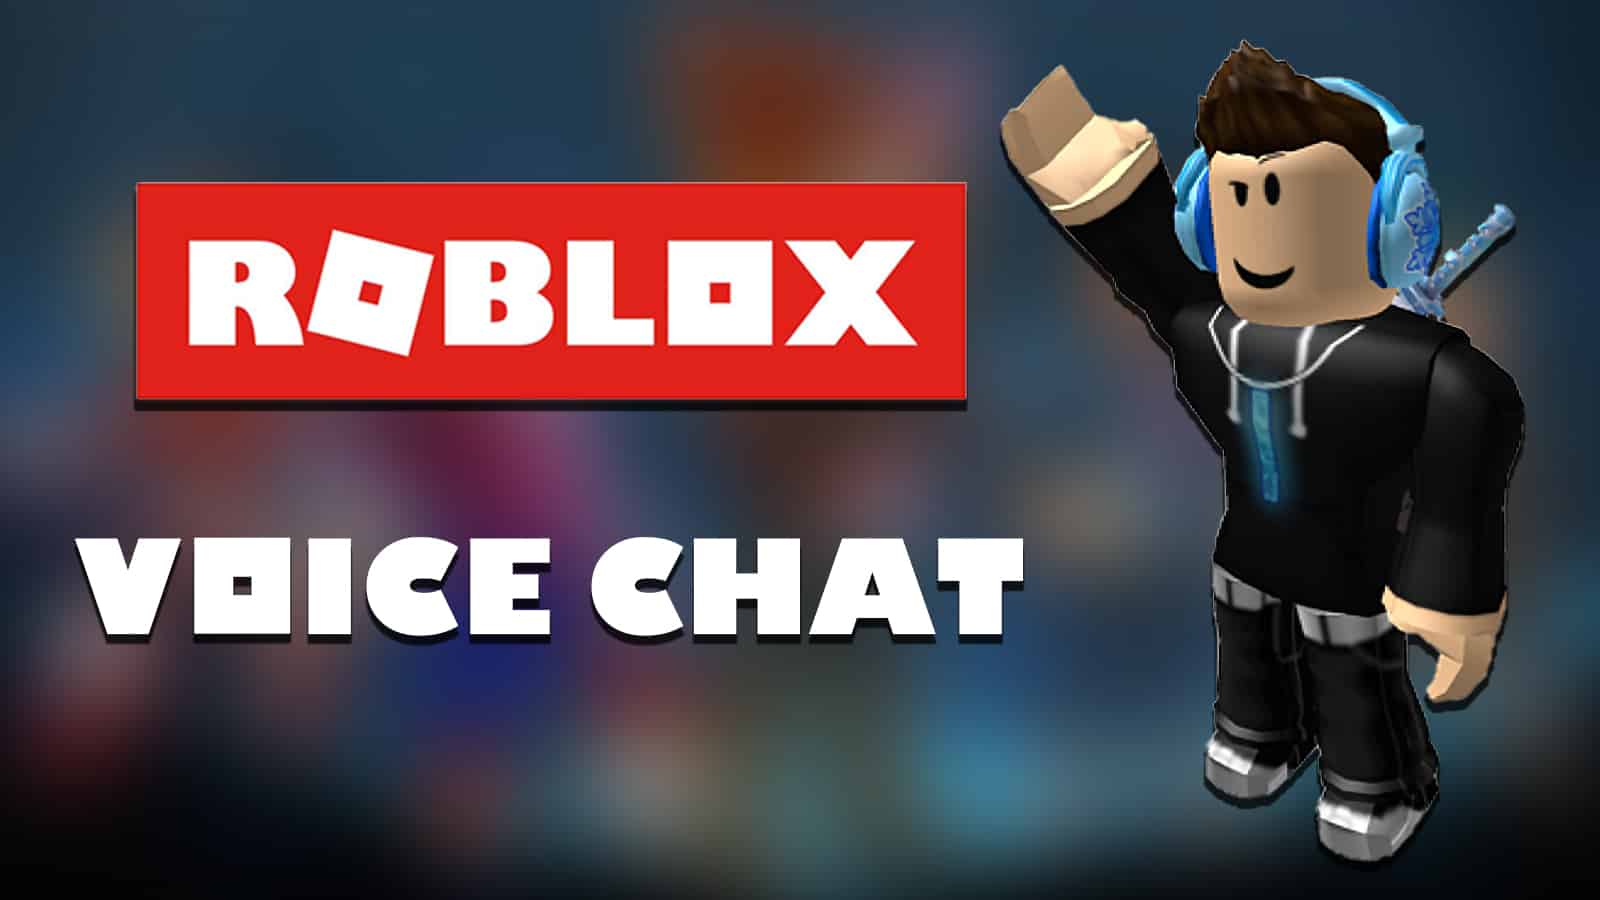 Why can't you chat on Roblox? - Microsoft Community